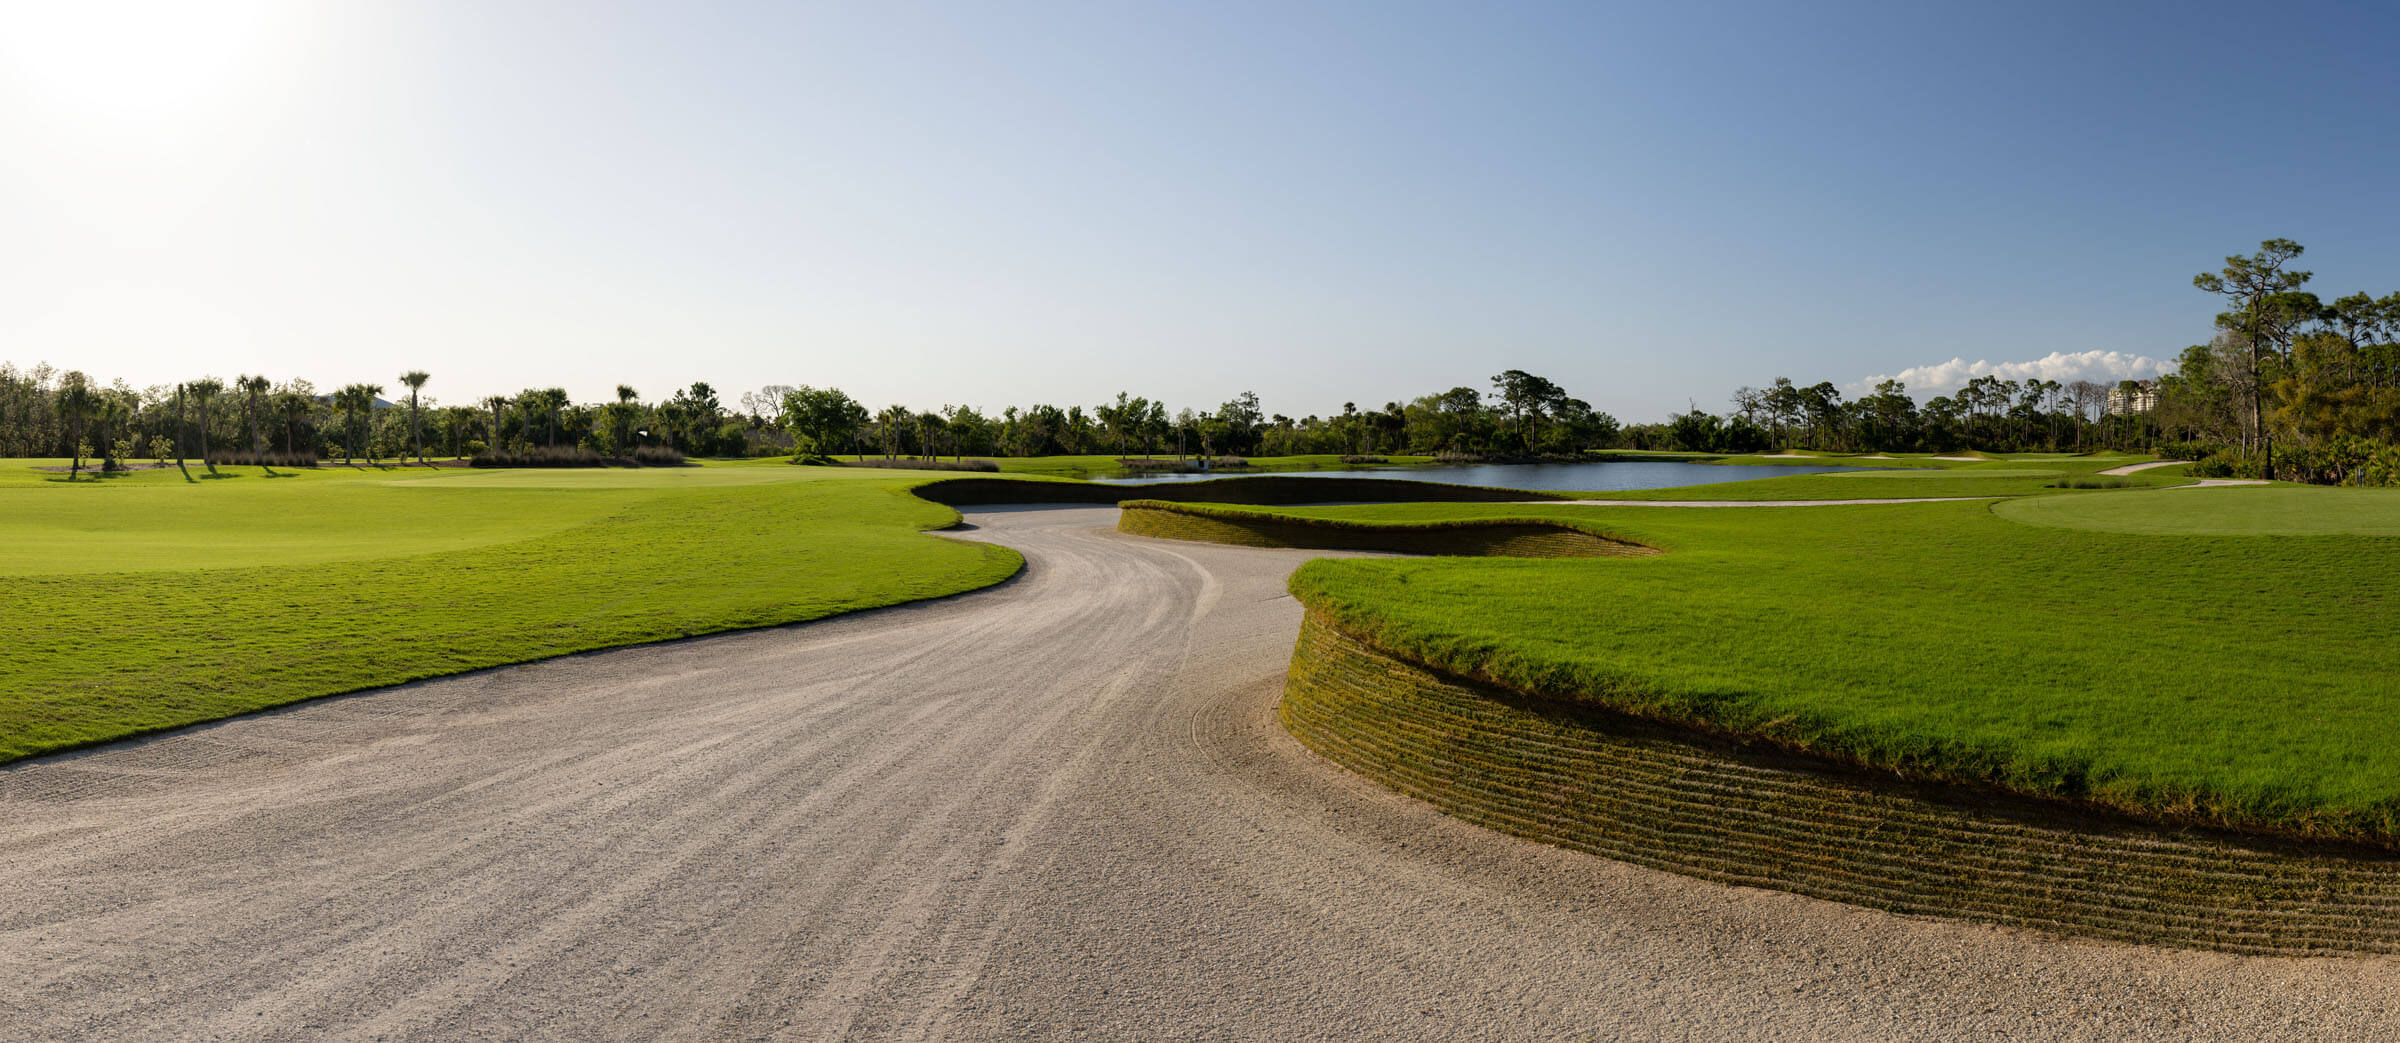 Wide-angle view of a golf course with a curving sand path, manicured green lawns, a water hazard, and scattered clouds in a clear blue sky.